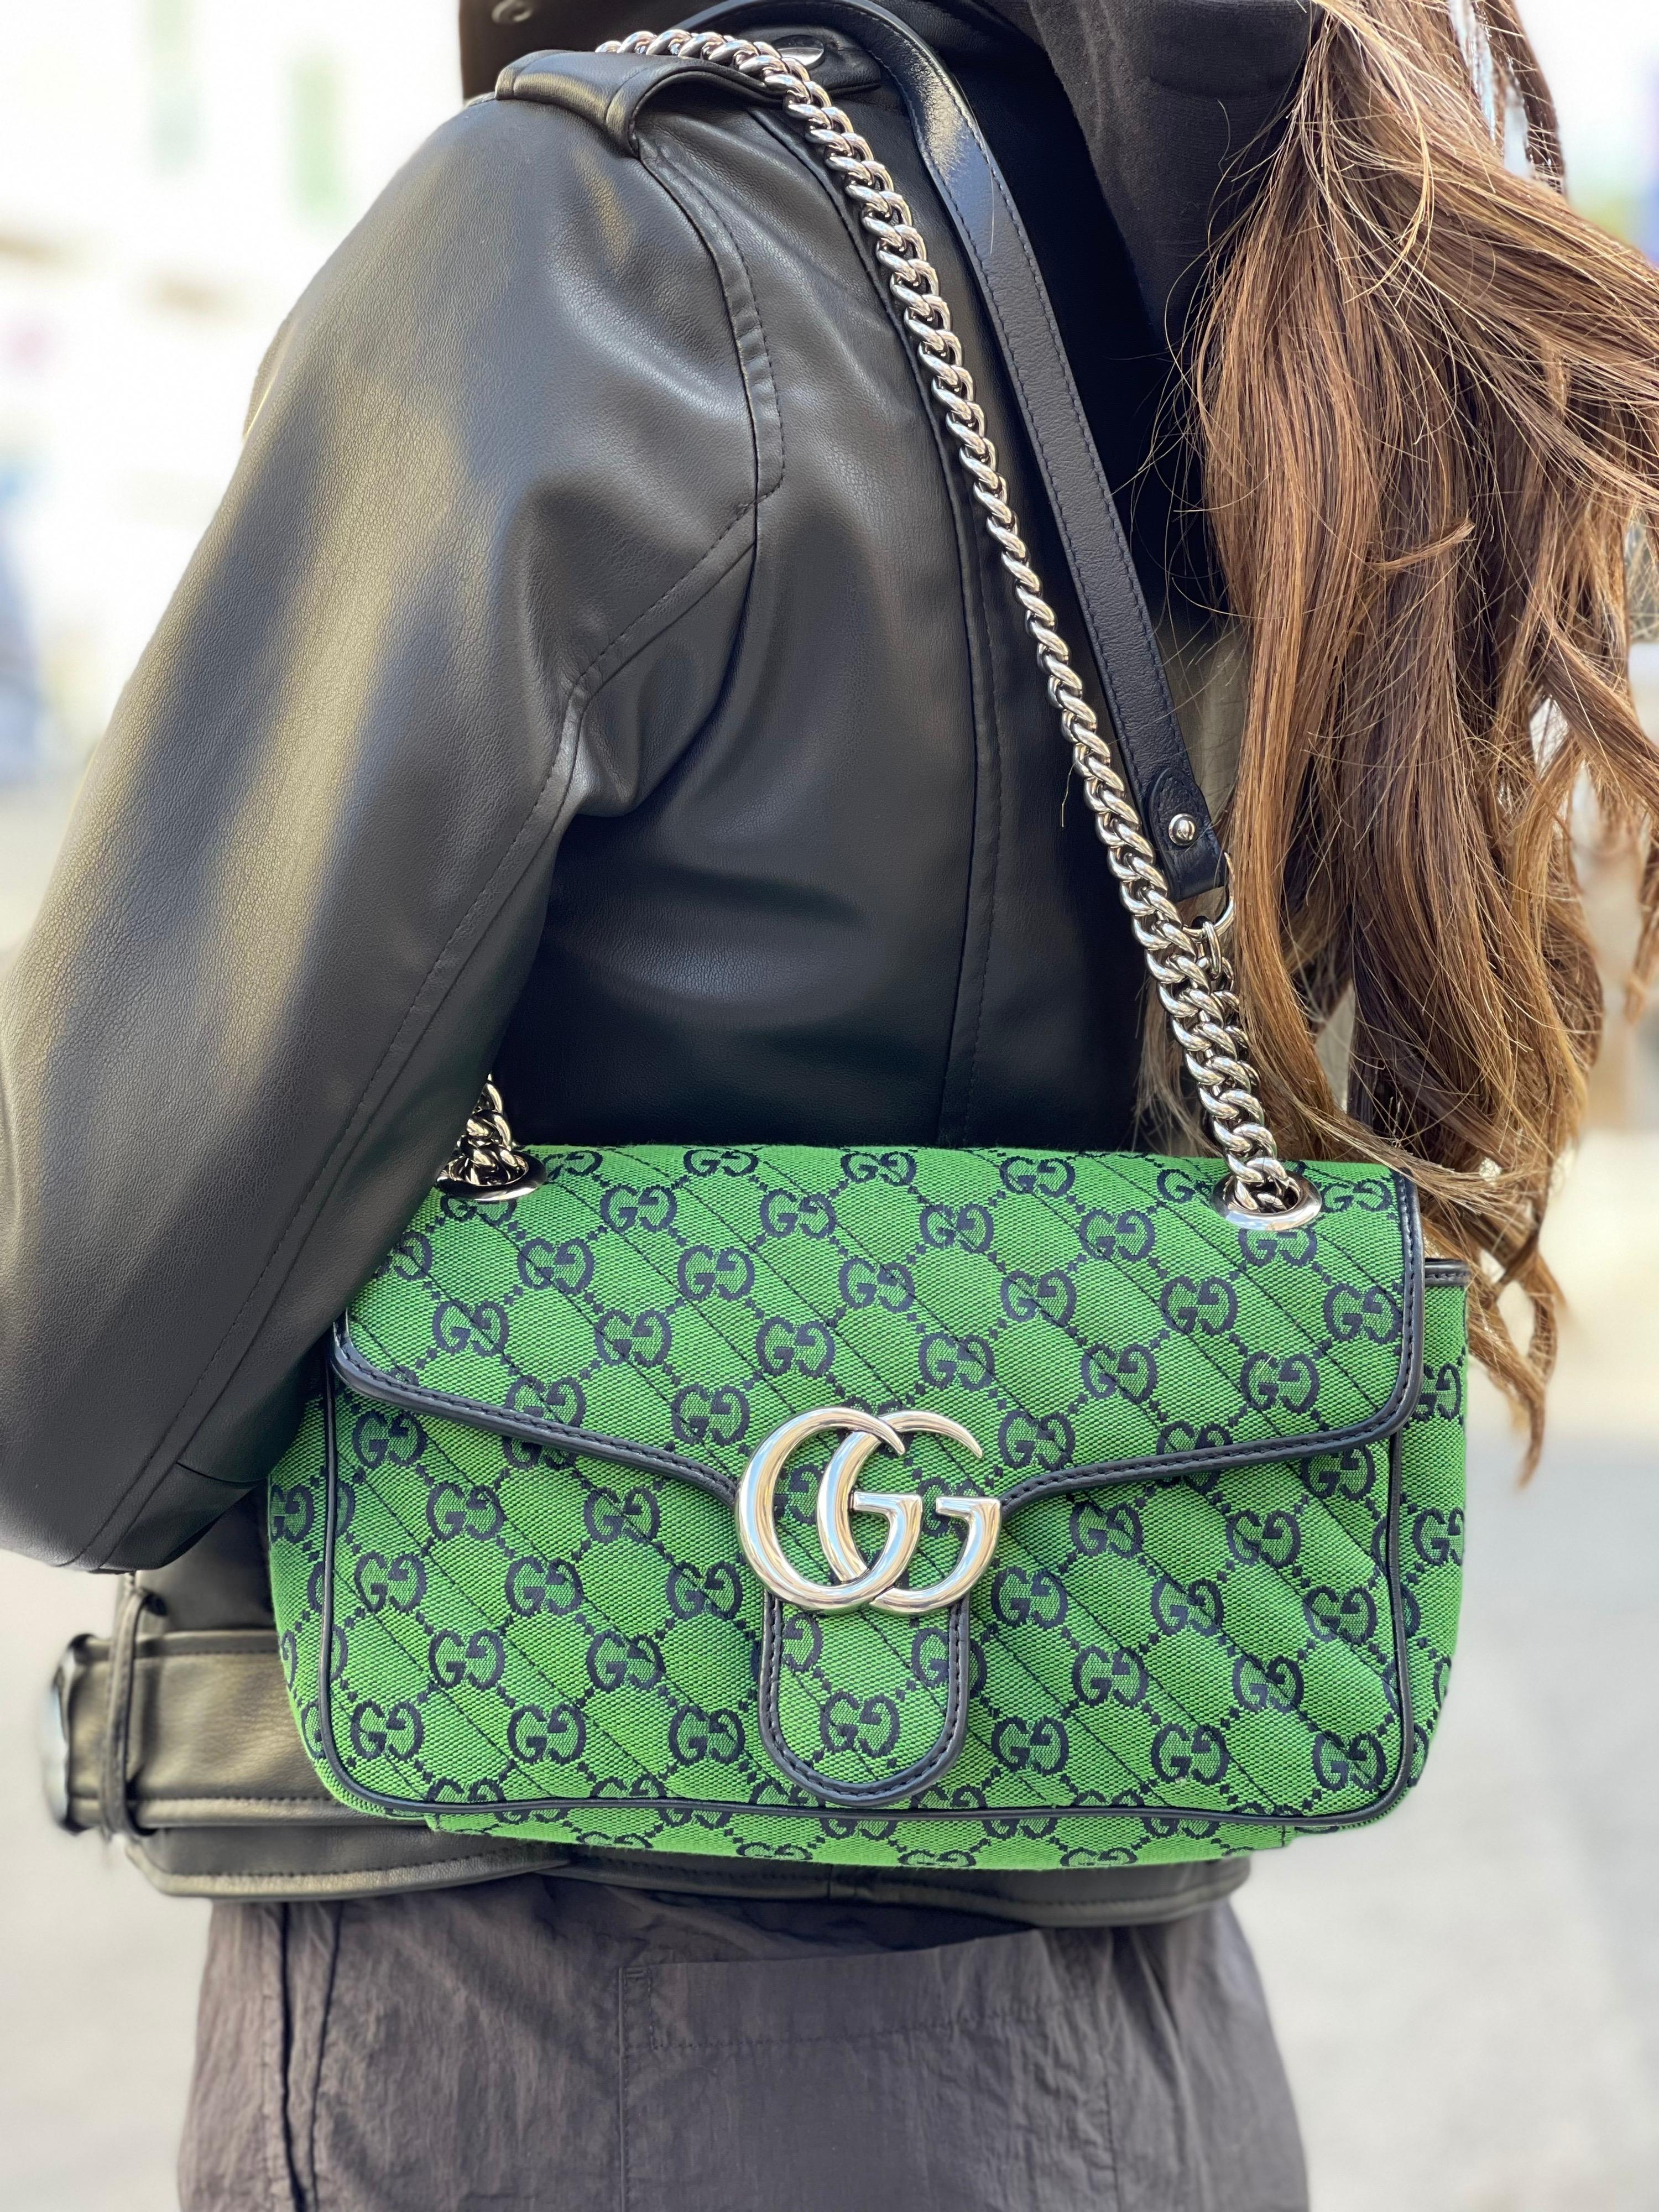 Gucci GG Marmont Multicolor shoulder bag  This bag was first introduced in the 1930s and redesigned over the years.  The bag is in green and blue diagonal matelassé GG fabric, with blue leather trims and silver hardware.  It carries a shoulder strap